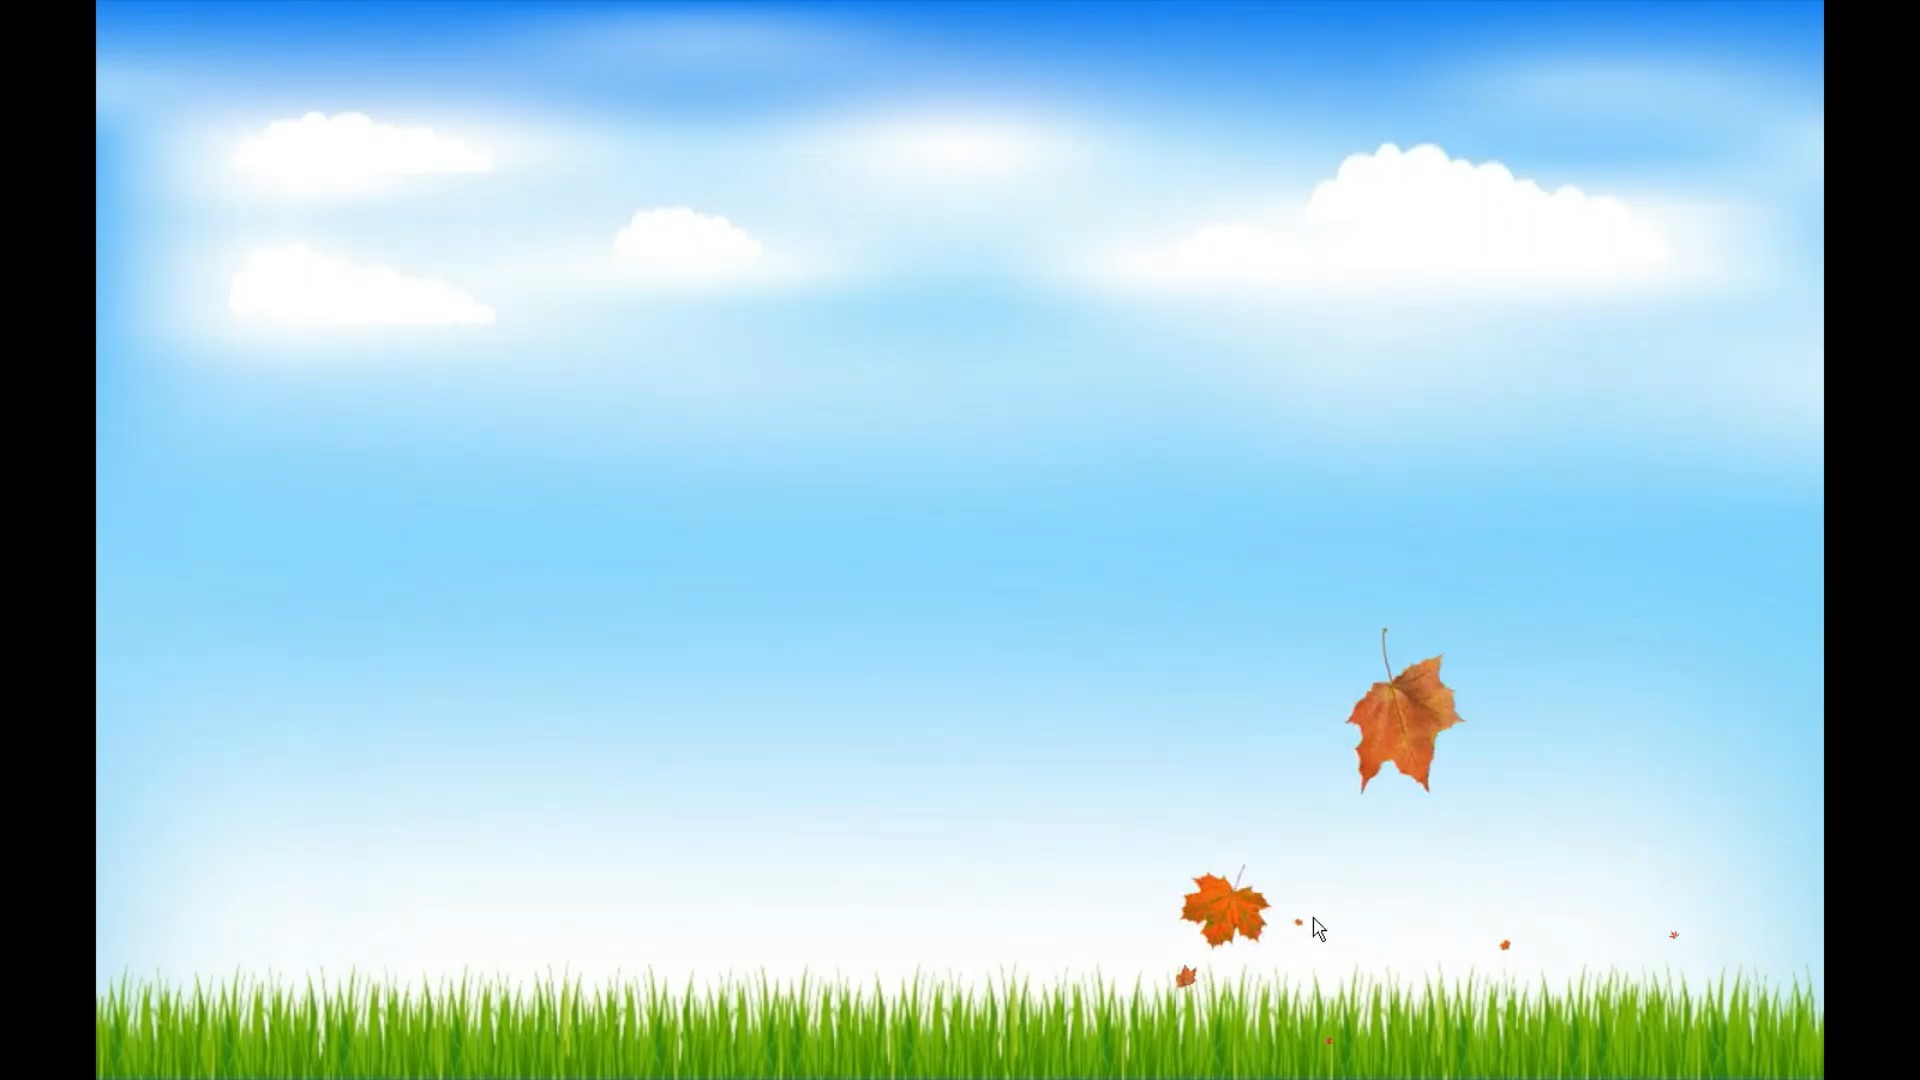 The Particle activity, the image shows a blue sky with green grass, as the user touches the image a particle effect of the chosen image pack will appear, in this case leaves are cascading over the blue sky.